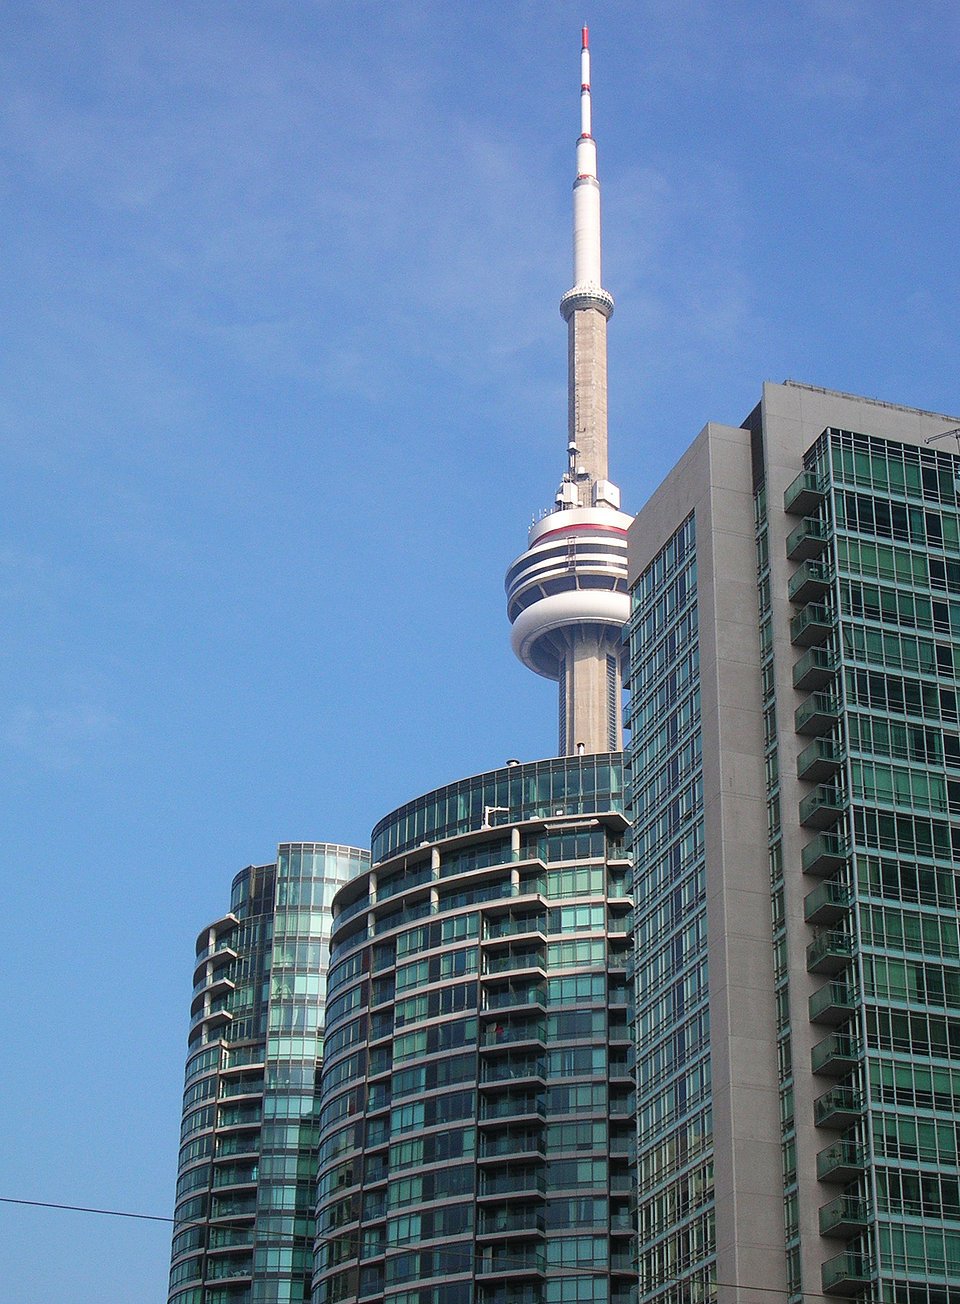 Condominiums Google image from http://www.thepropertyshow.ca/about